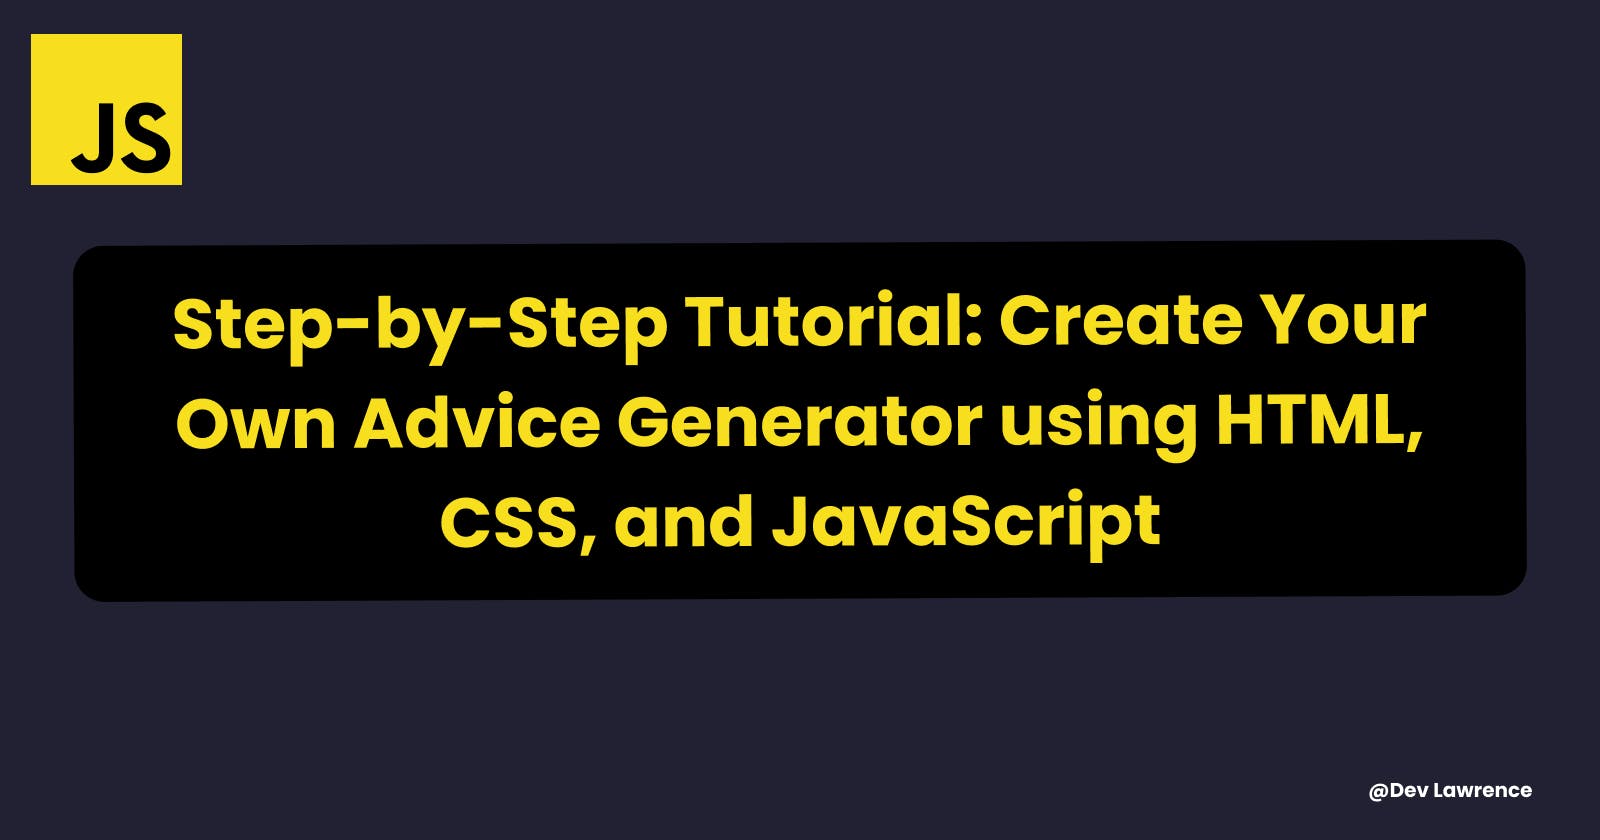 From Scratch to App: Building an Advice Generator with HTML, CSS, and JavaScript